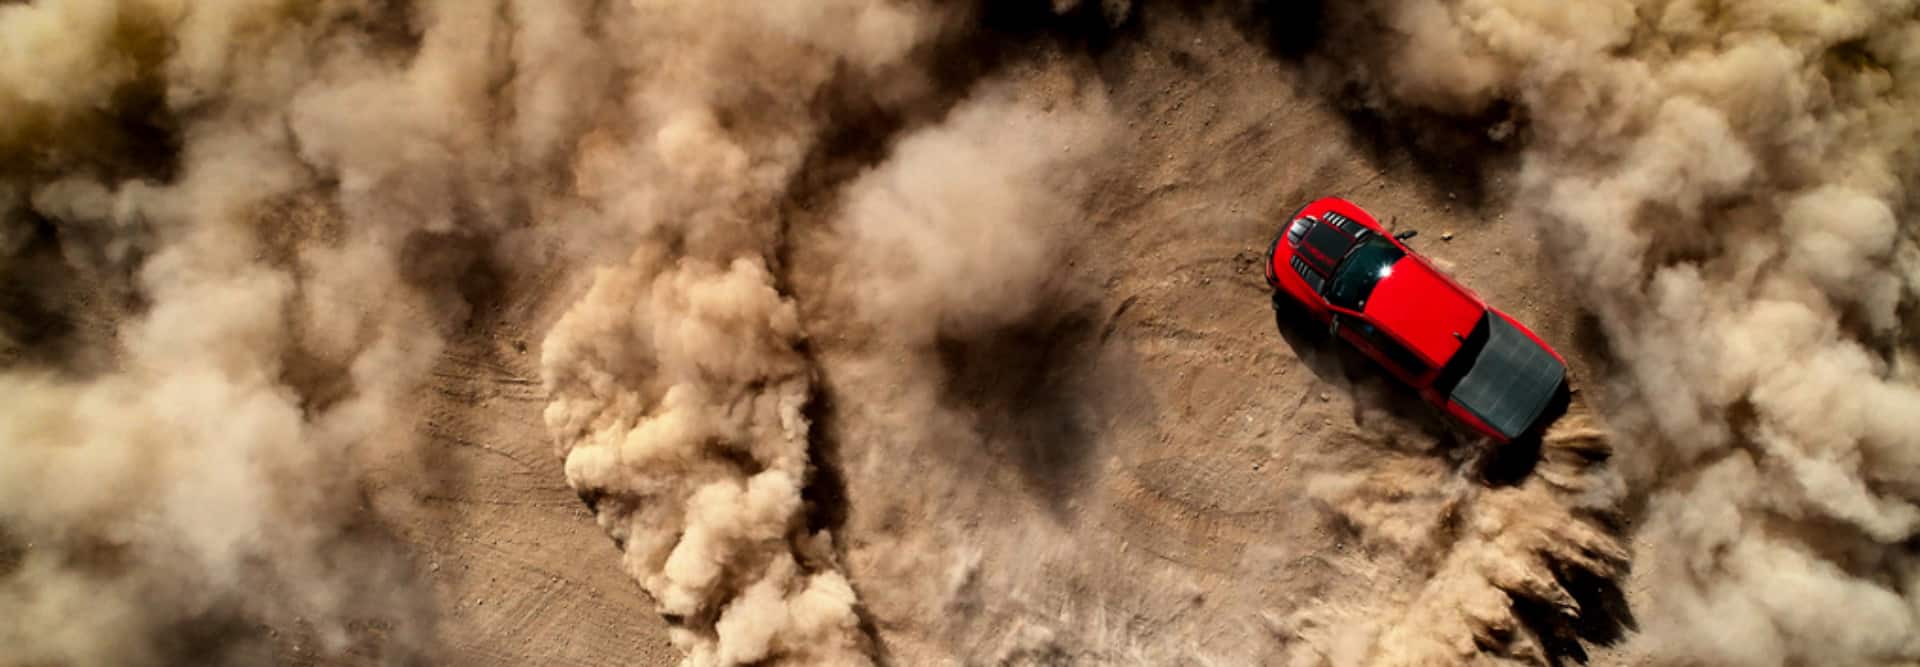 An overhead view of a red 2021 Ram 1500 TRX creating doughnuts in the sand, kicking up clouds of dust.